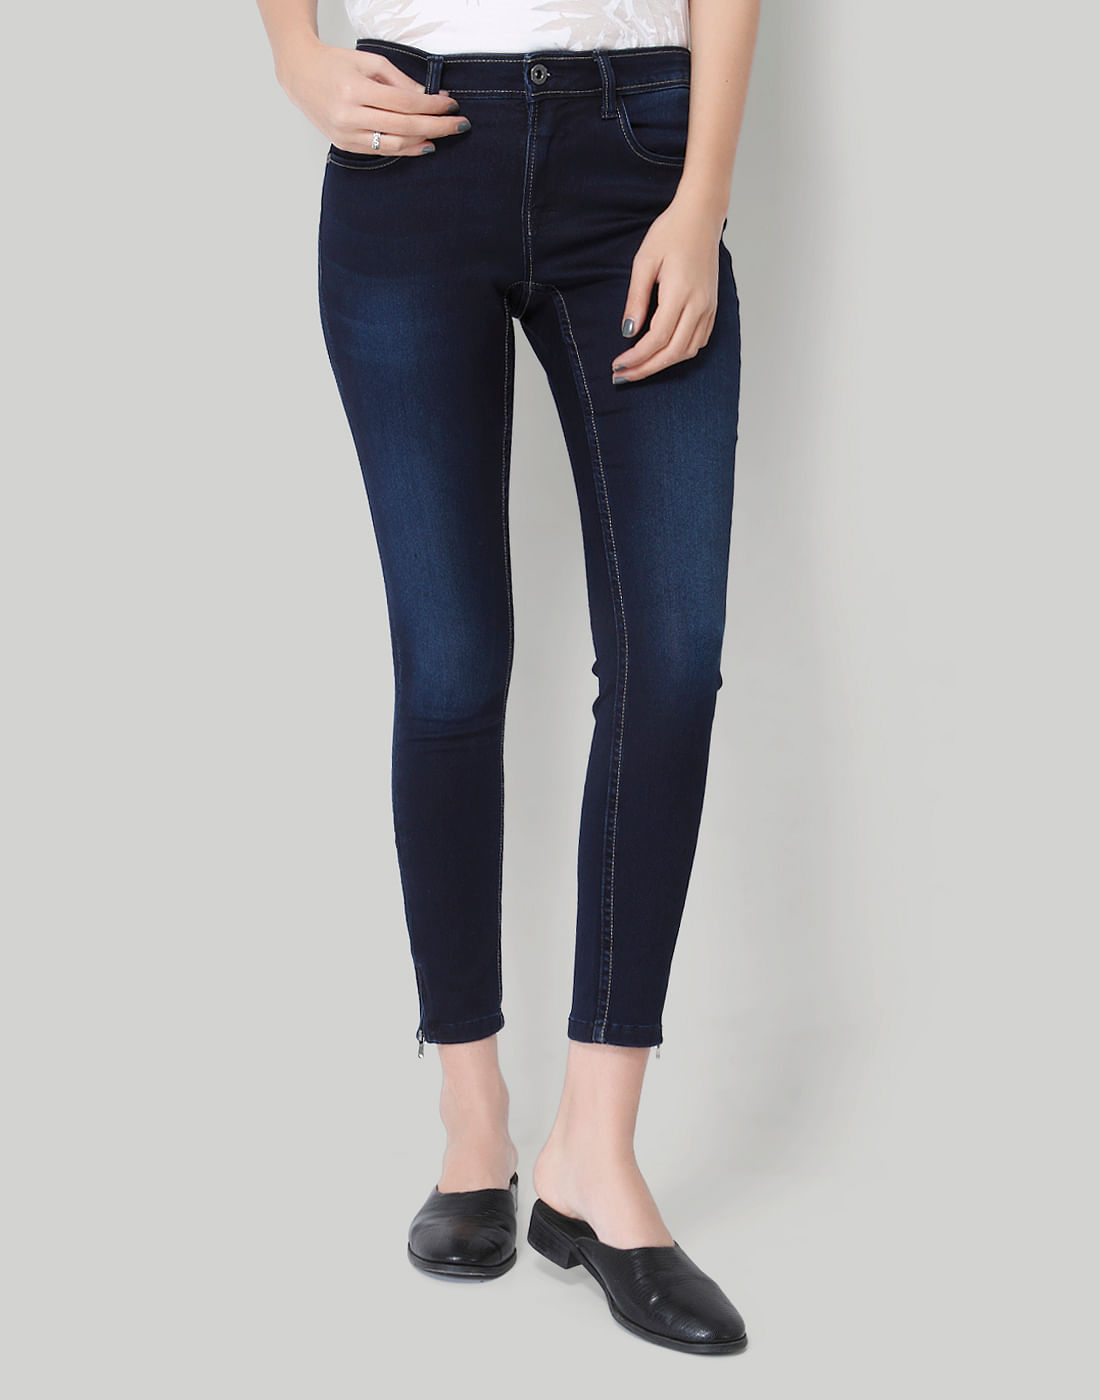 ankle length jeans for ladies online